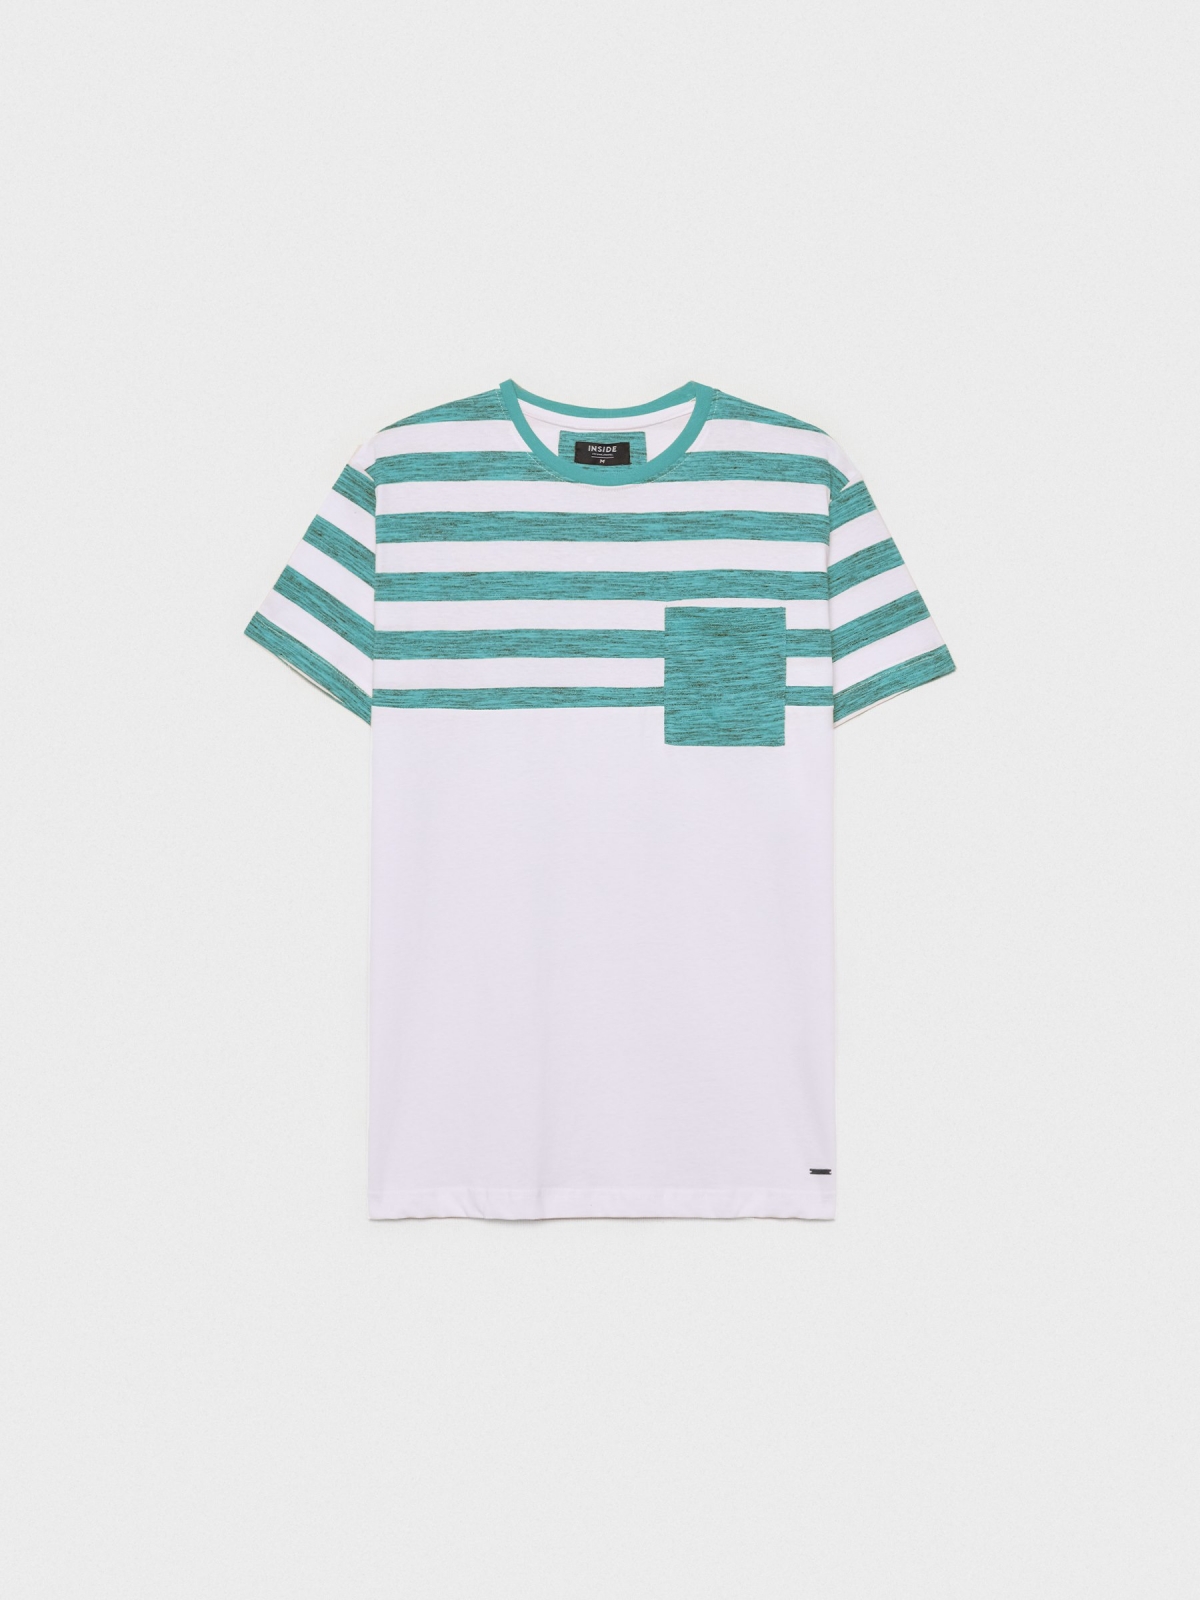  Striped T-shirt with pocket green